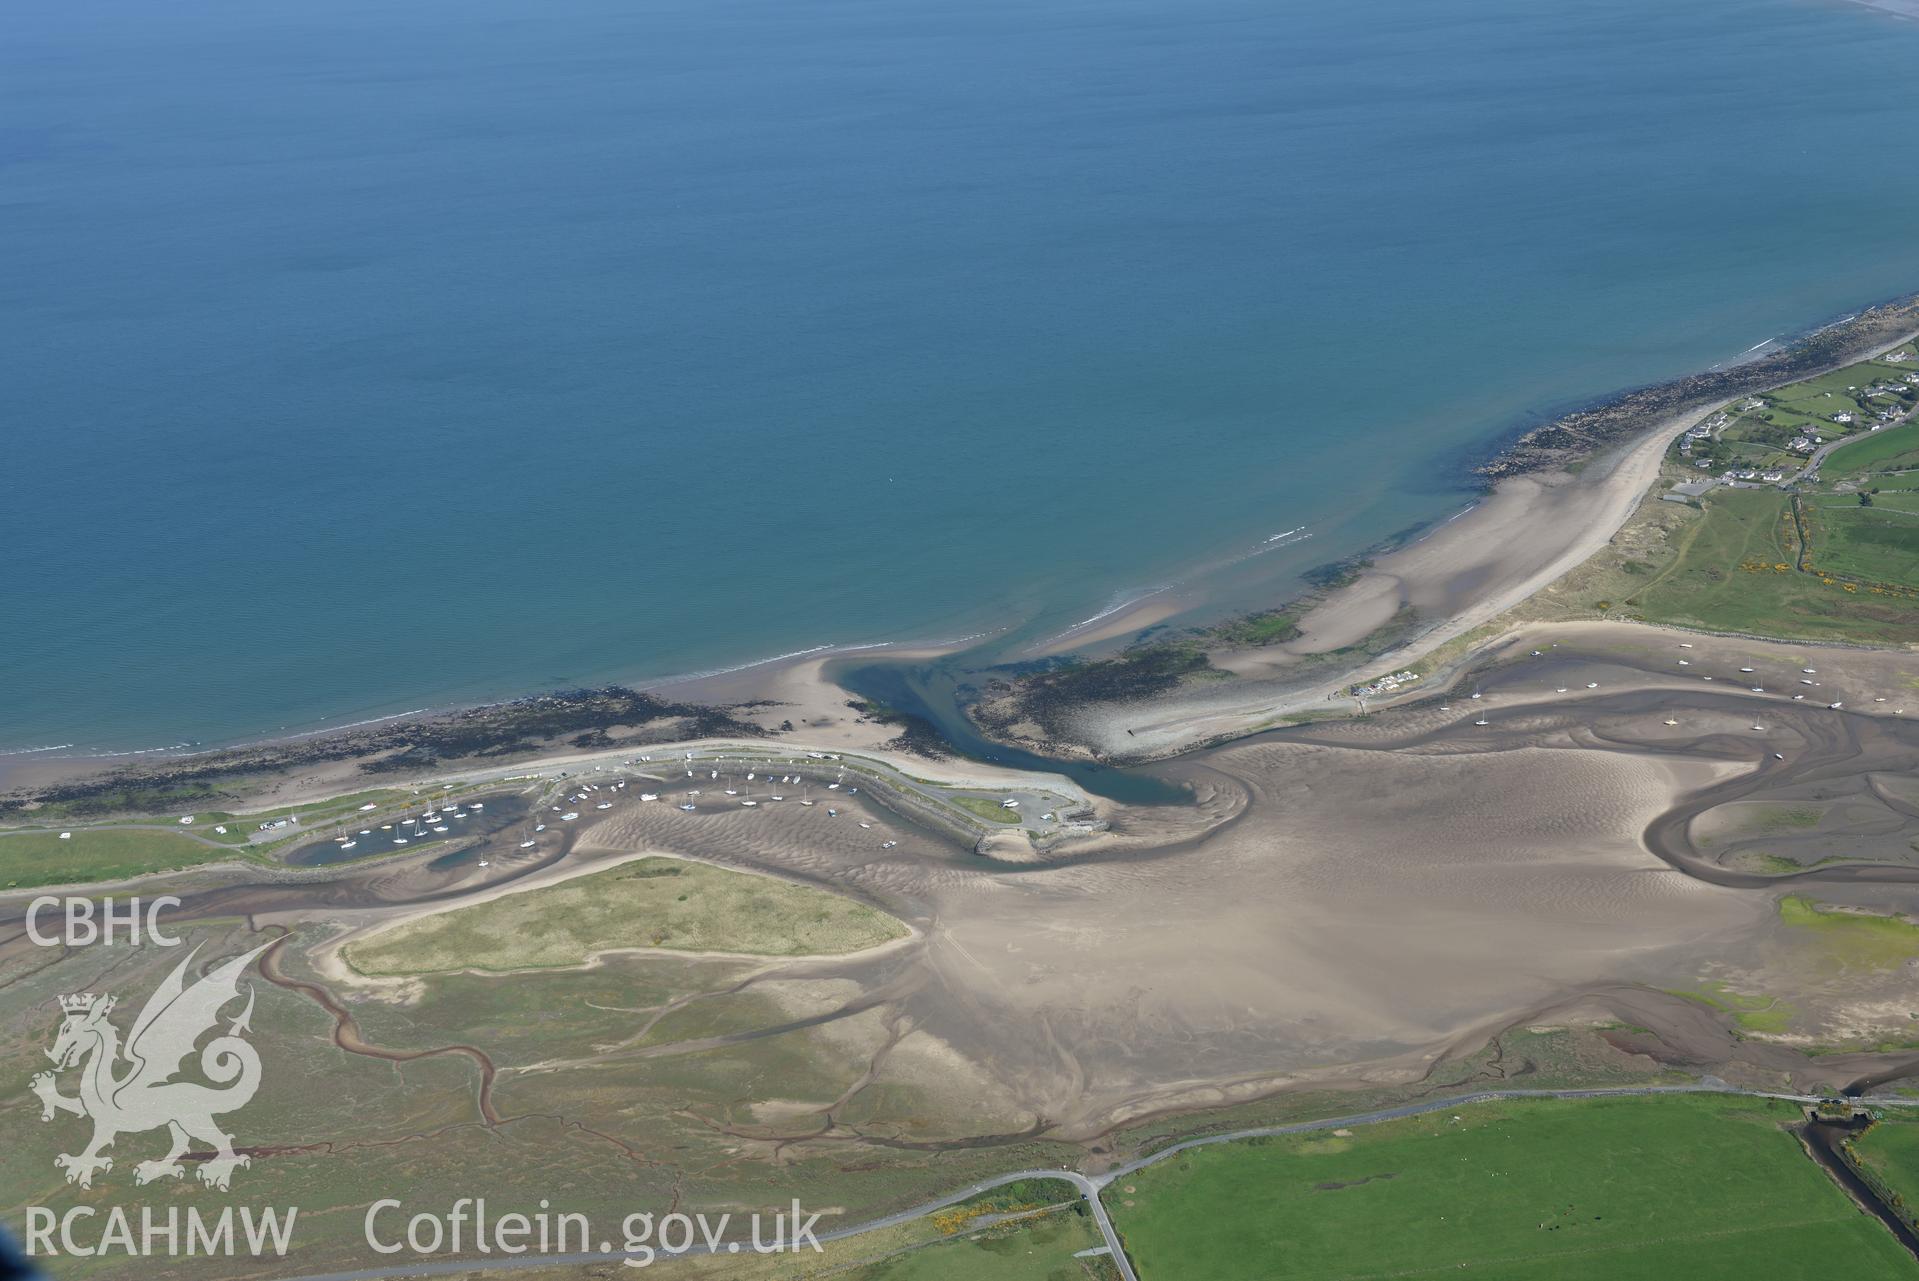 Aerial photography of Shell Island taken on 3rd May 2017.  Baseline aerial reconnaissance survey for the CHERISH Project. ? Crown: CHERISH PROJECT 2017. Produced with EU funds through the Ireland Wales Co-operation Programme 2014-2020. All material made freely available through the Open Government Licence.